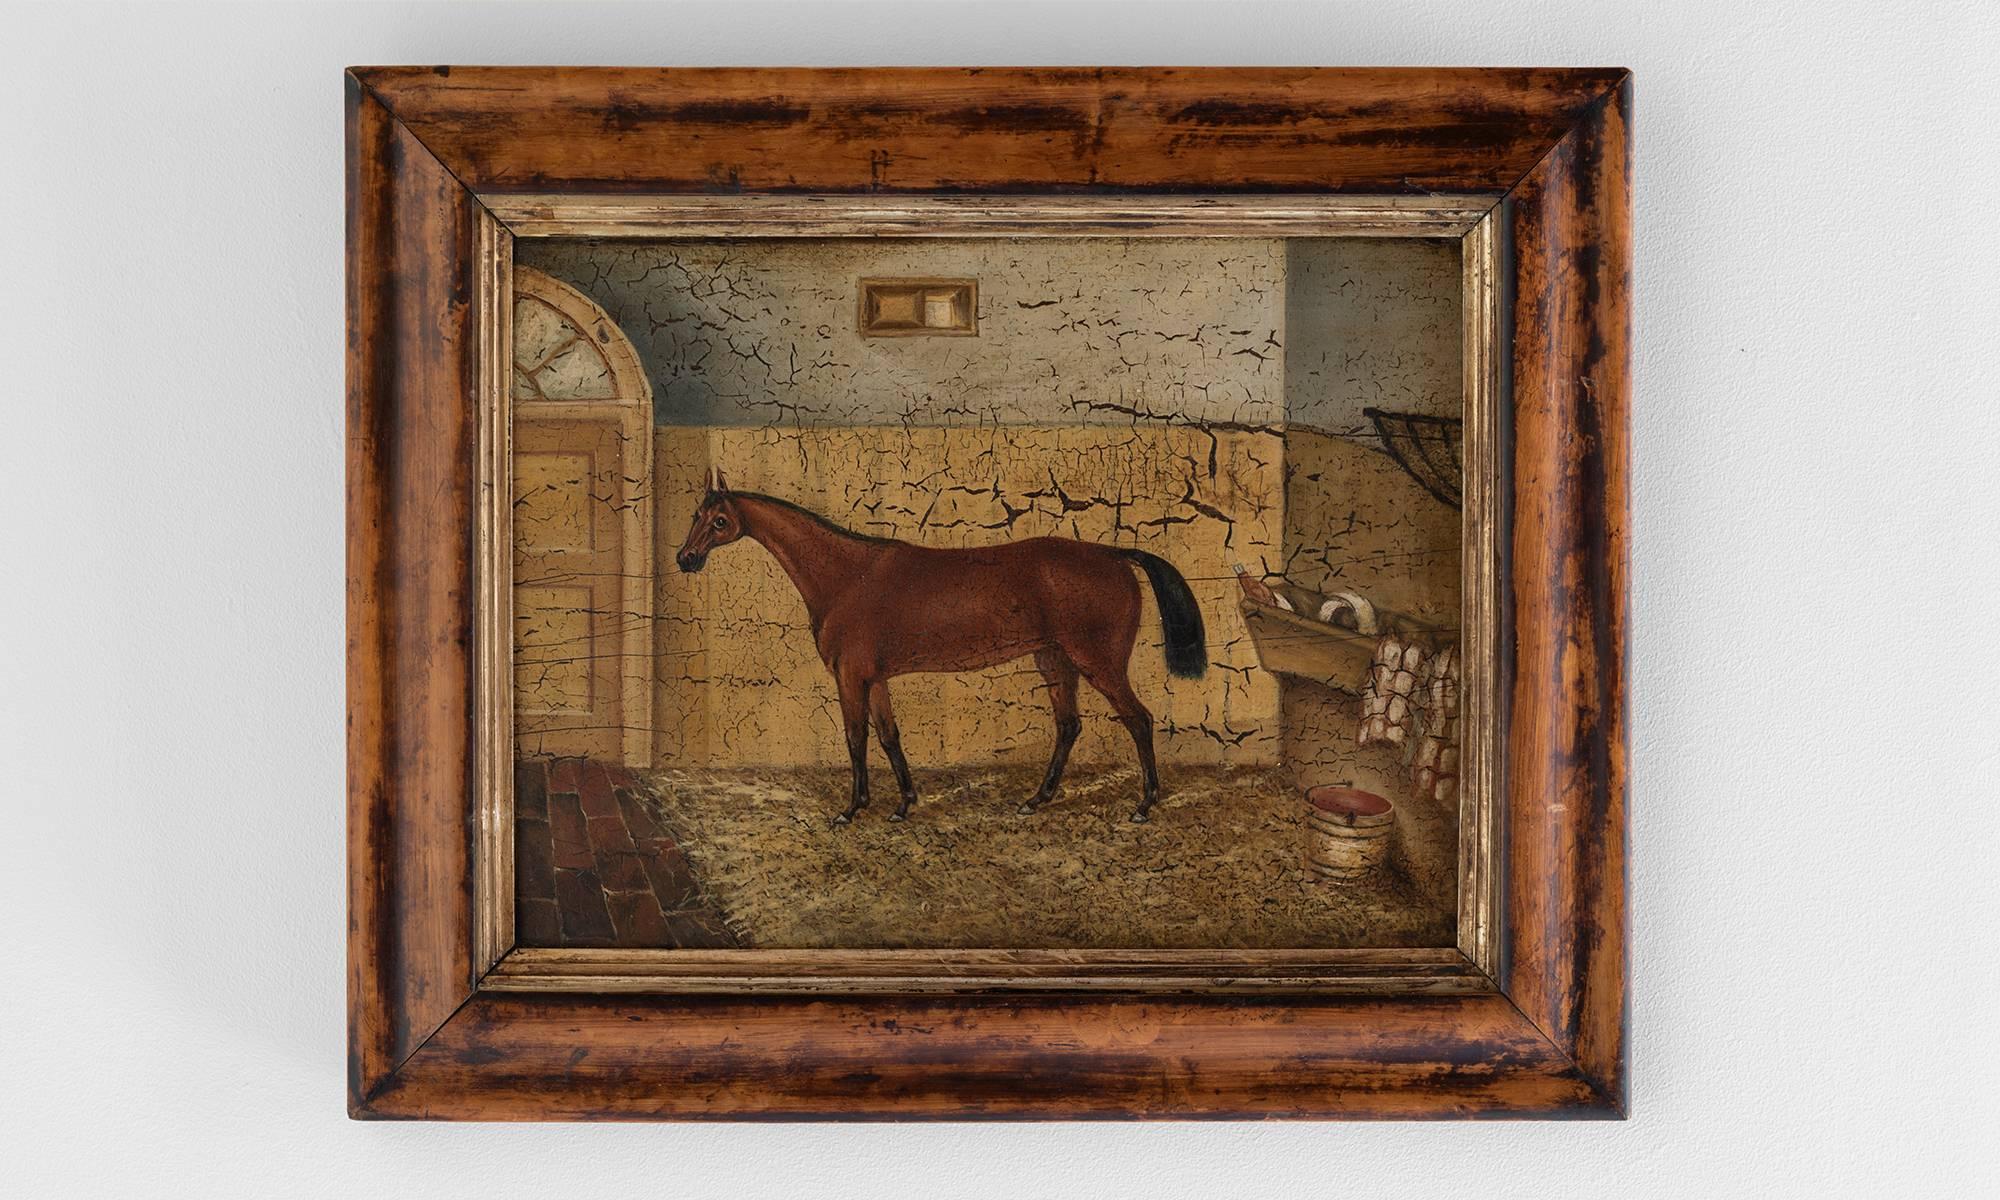 Oil painting of a racing horse, circa 1840.

Depiction of a horse in a stabile. Oil on board with walnut veneered frame.